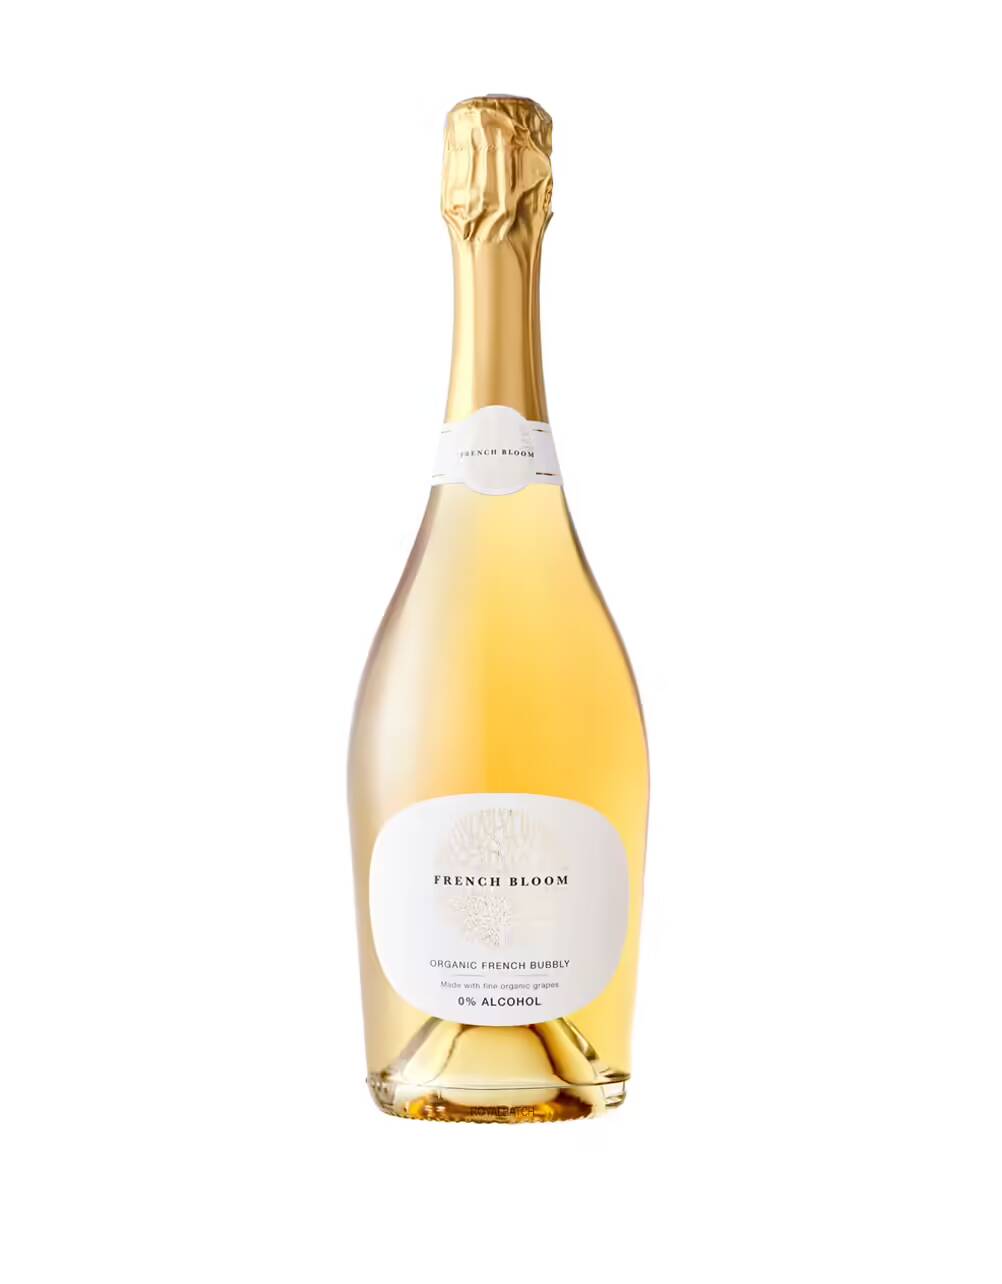 French Bloom Le Blanc Organic French Bubbly Sparkling Wine 375ml